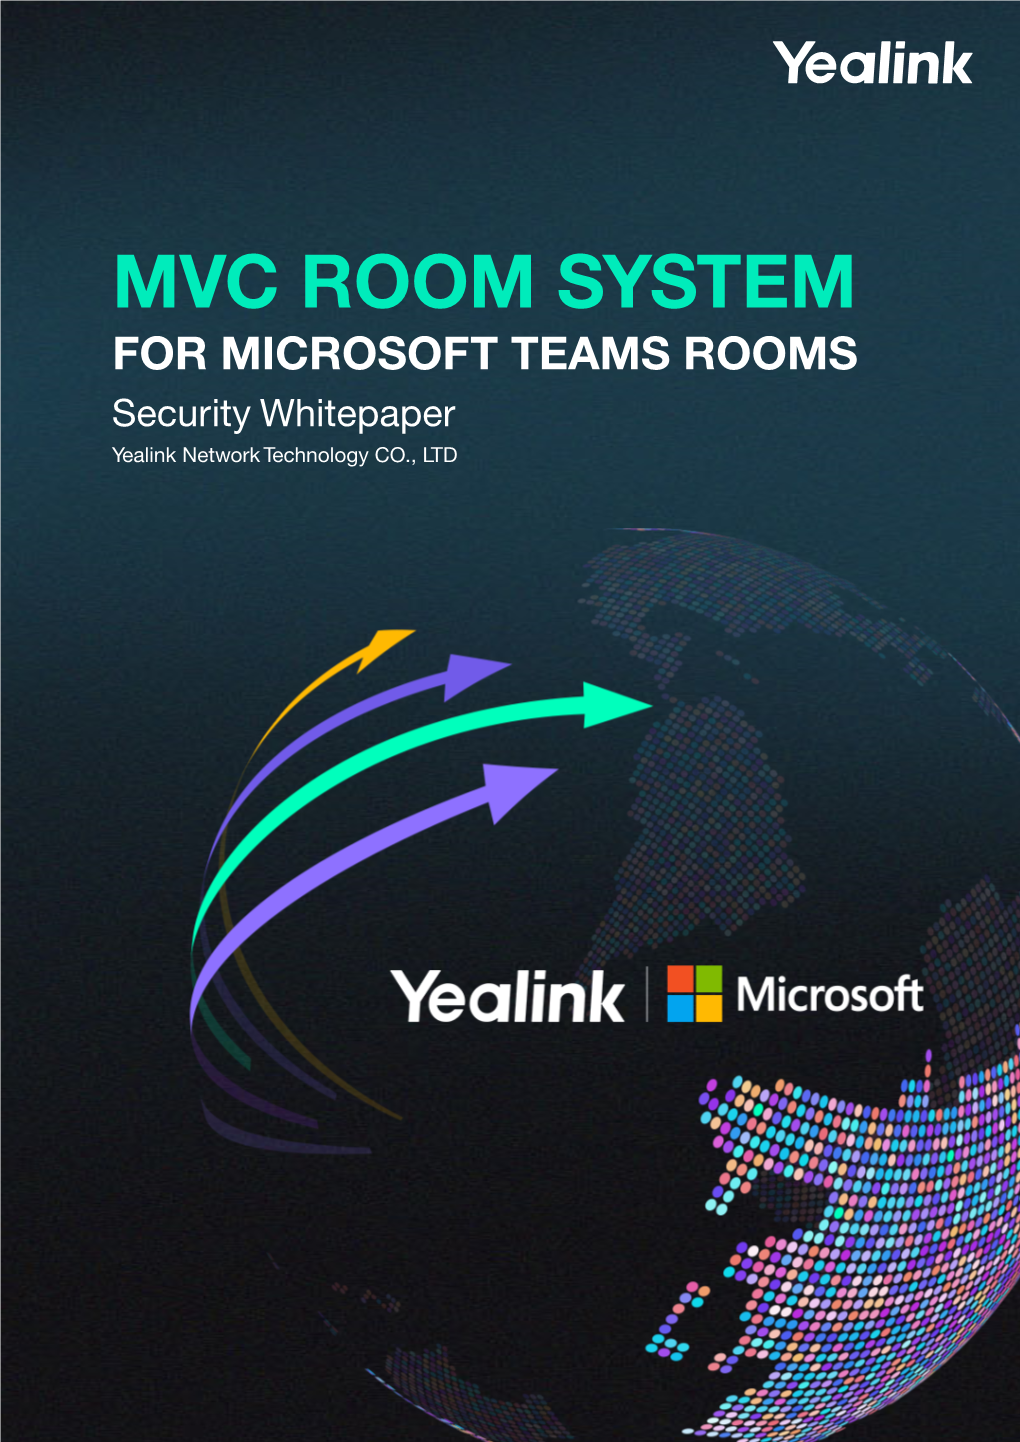 MVC ROOM SYSTEM for MICROSOFT TEAMS ROOMS Security Whitepaper Yealink Network Technology CO., LTD CONTENTS